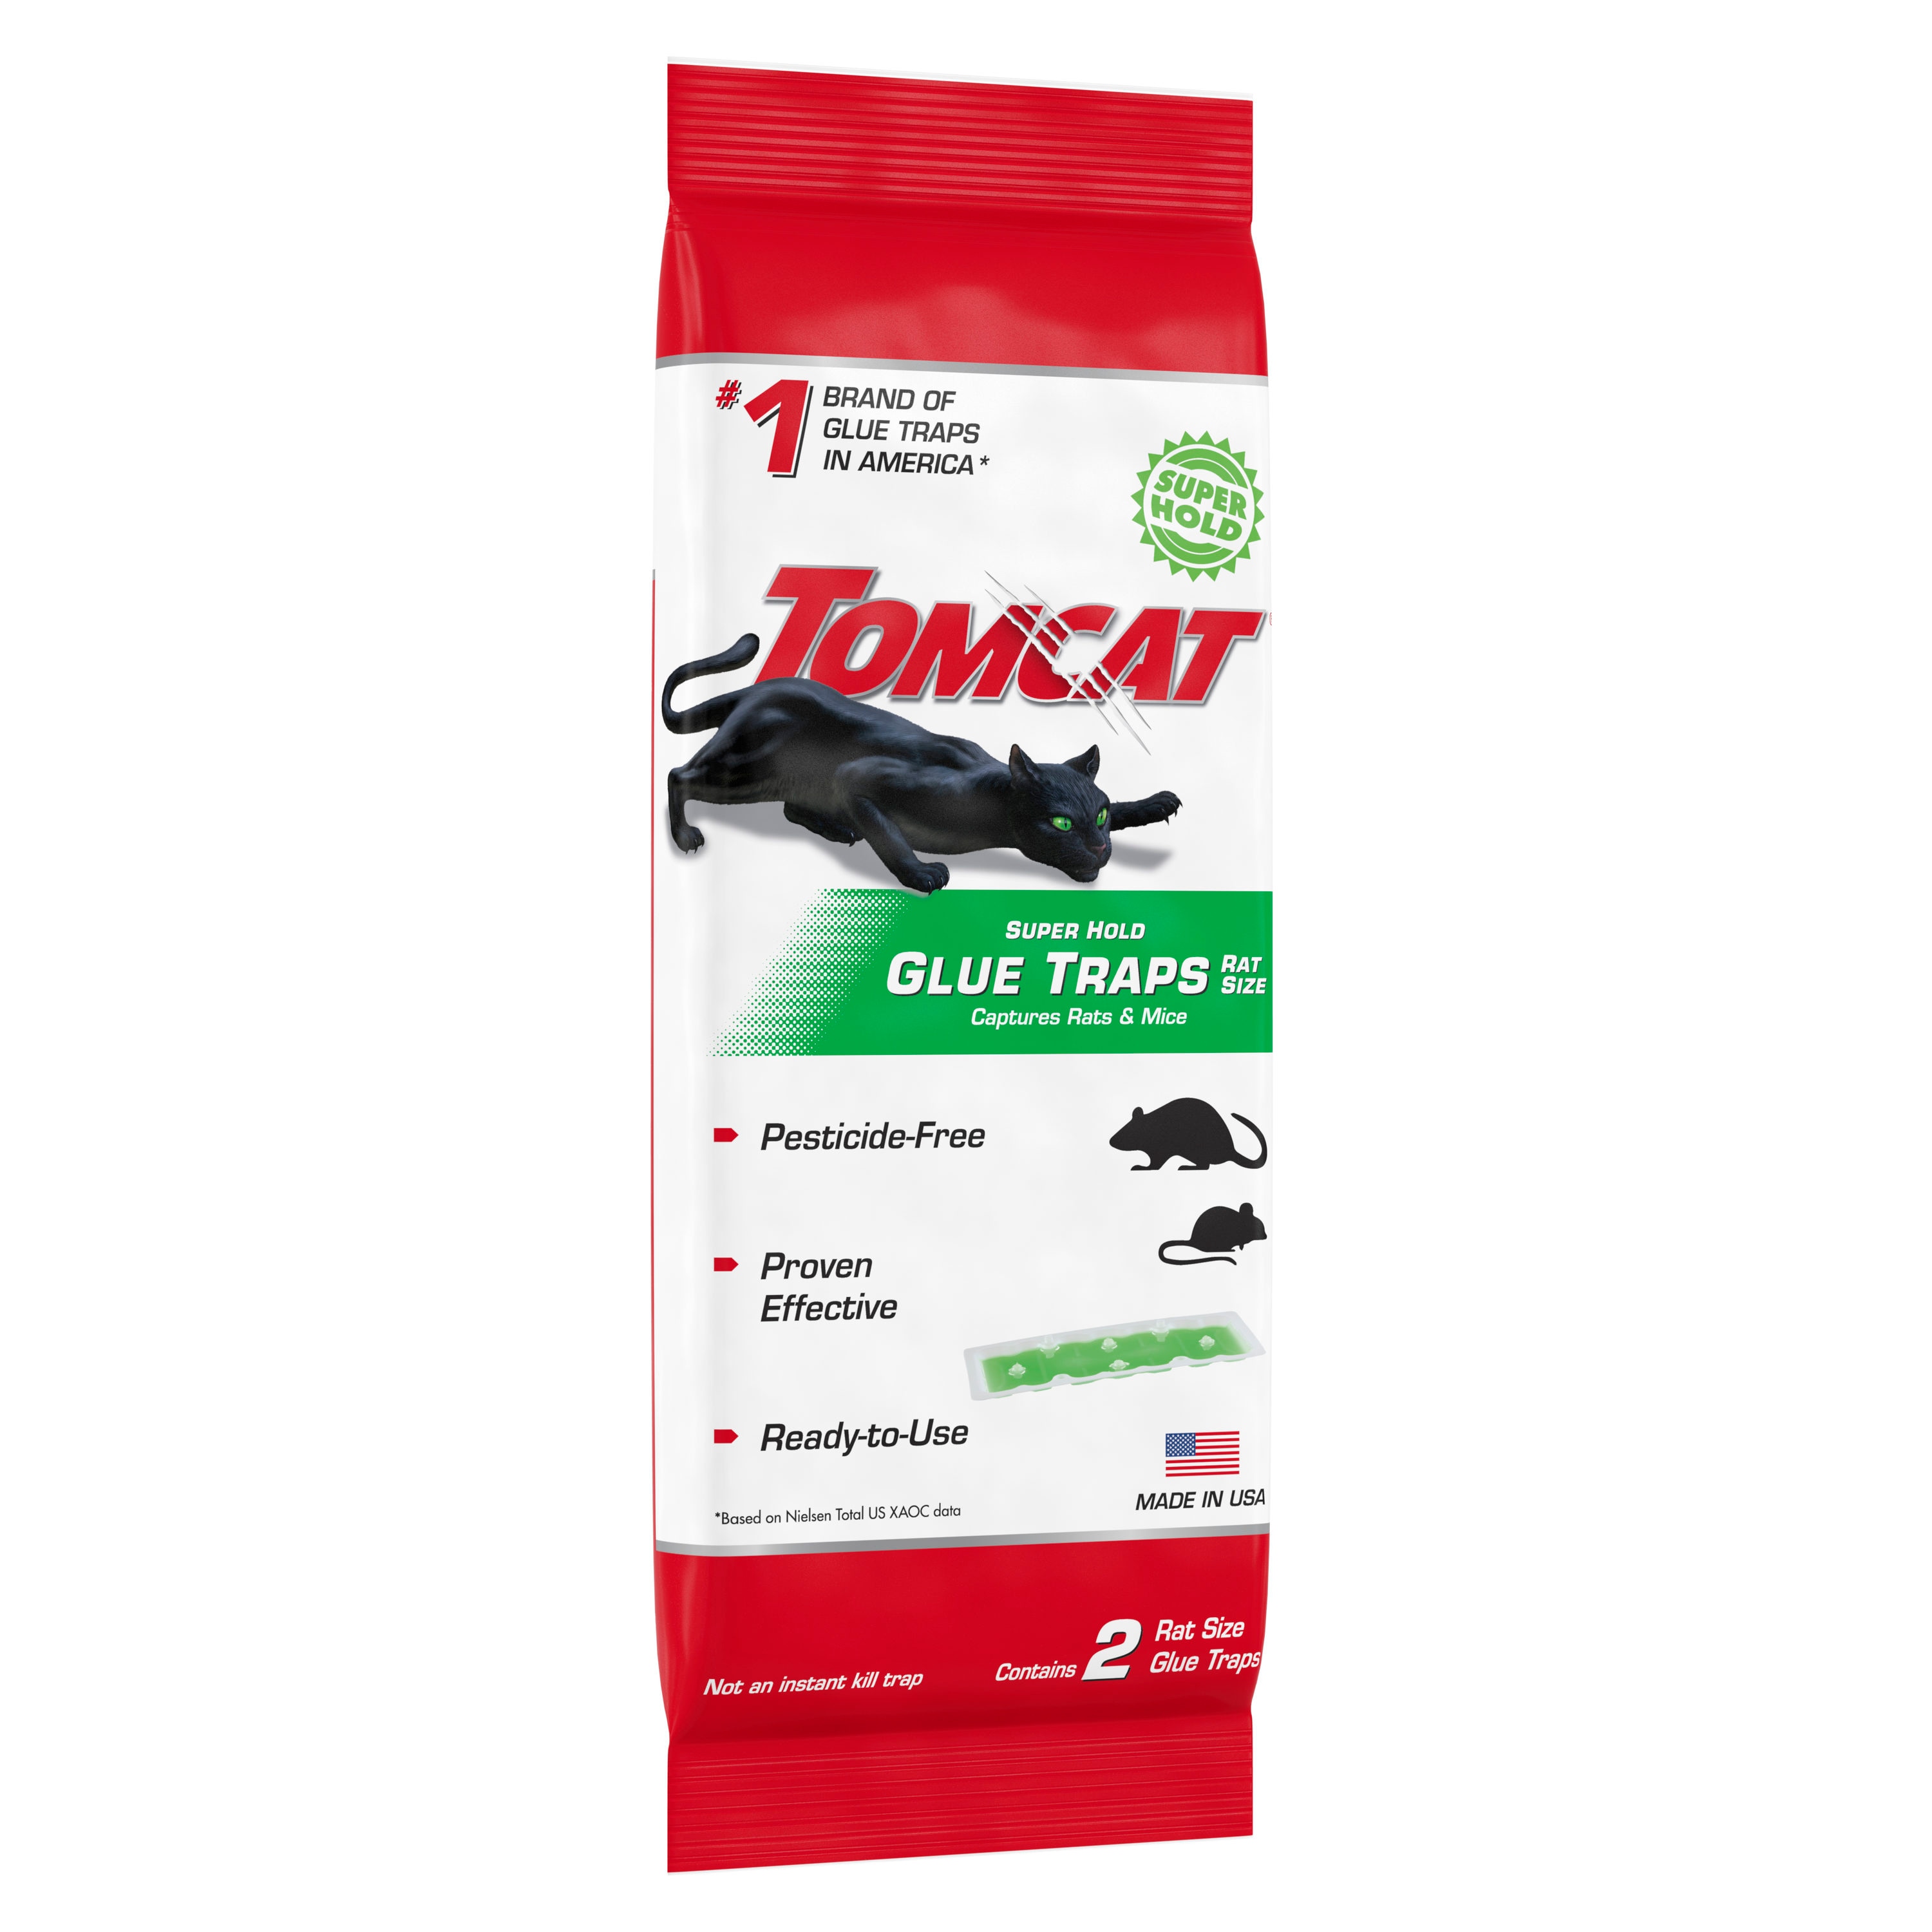 Tomcat Mouse Attractant Gel For Use with Mouse or Rat Traps